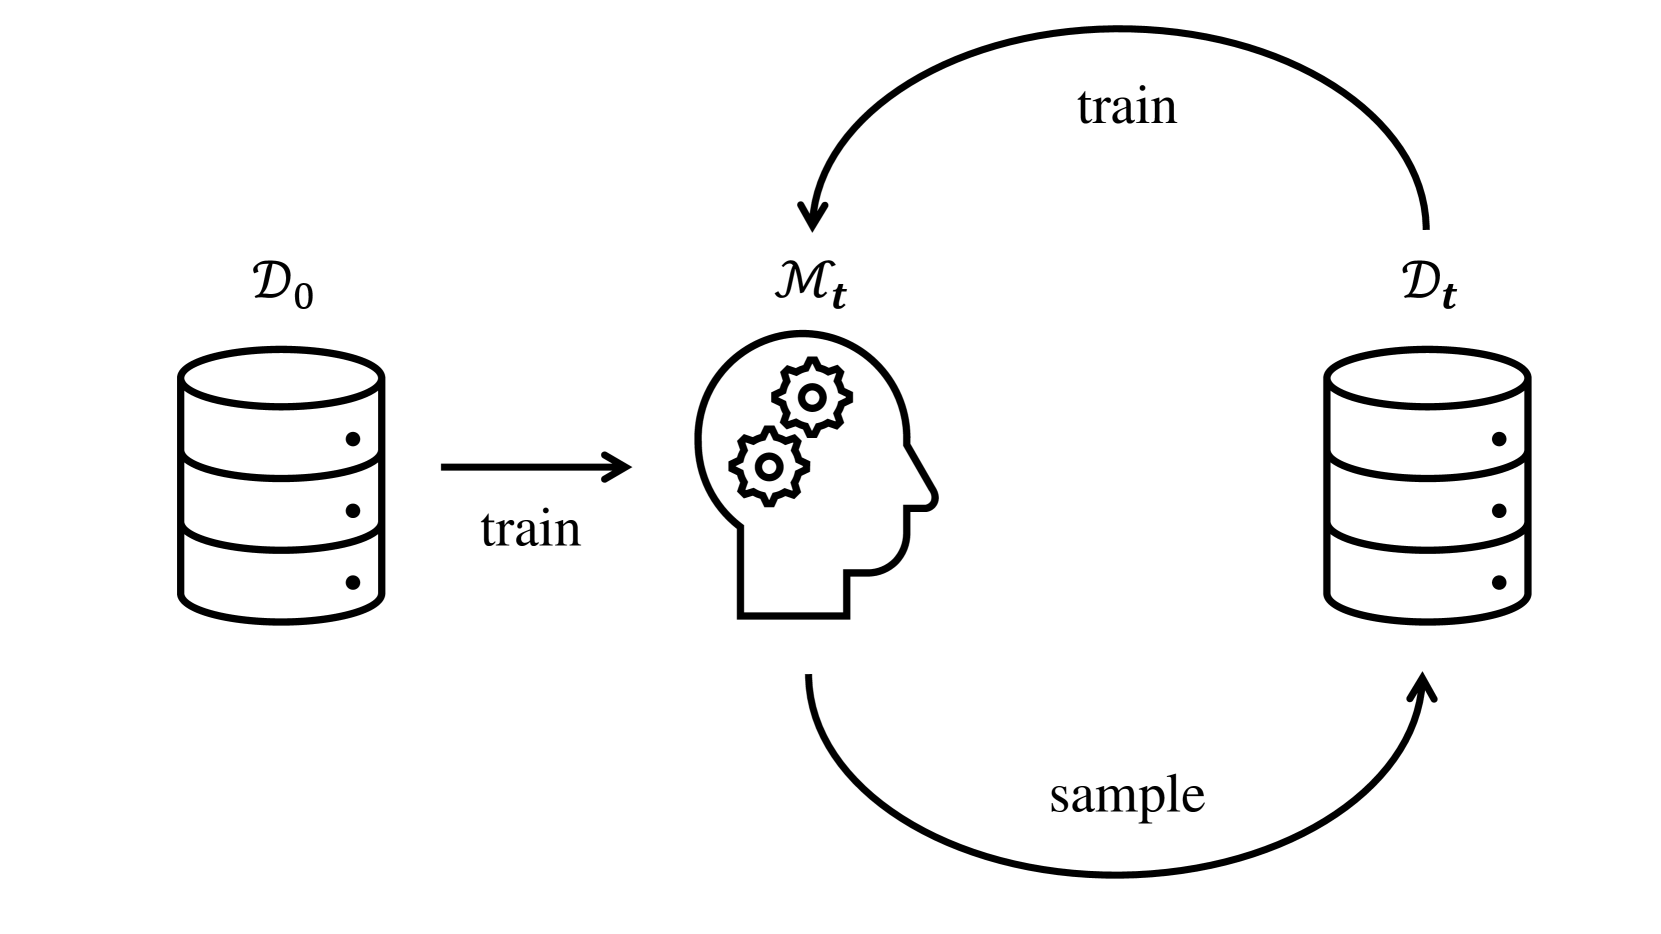 Large Language Models Suffer From Their Own Output: An Analysis of the Self-Consuming Training Loop